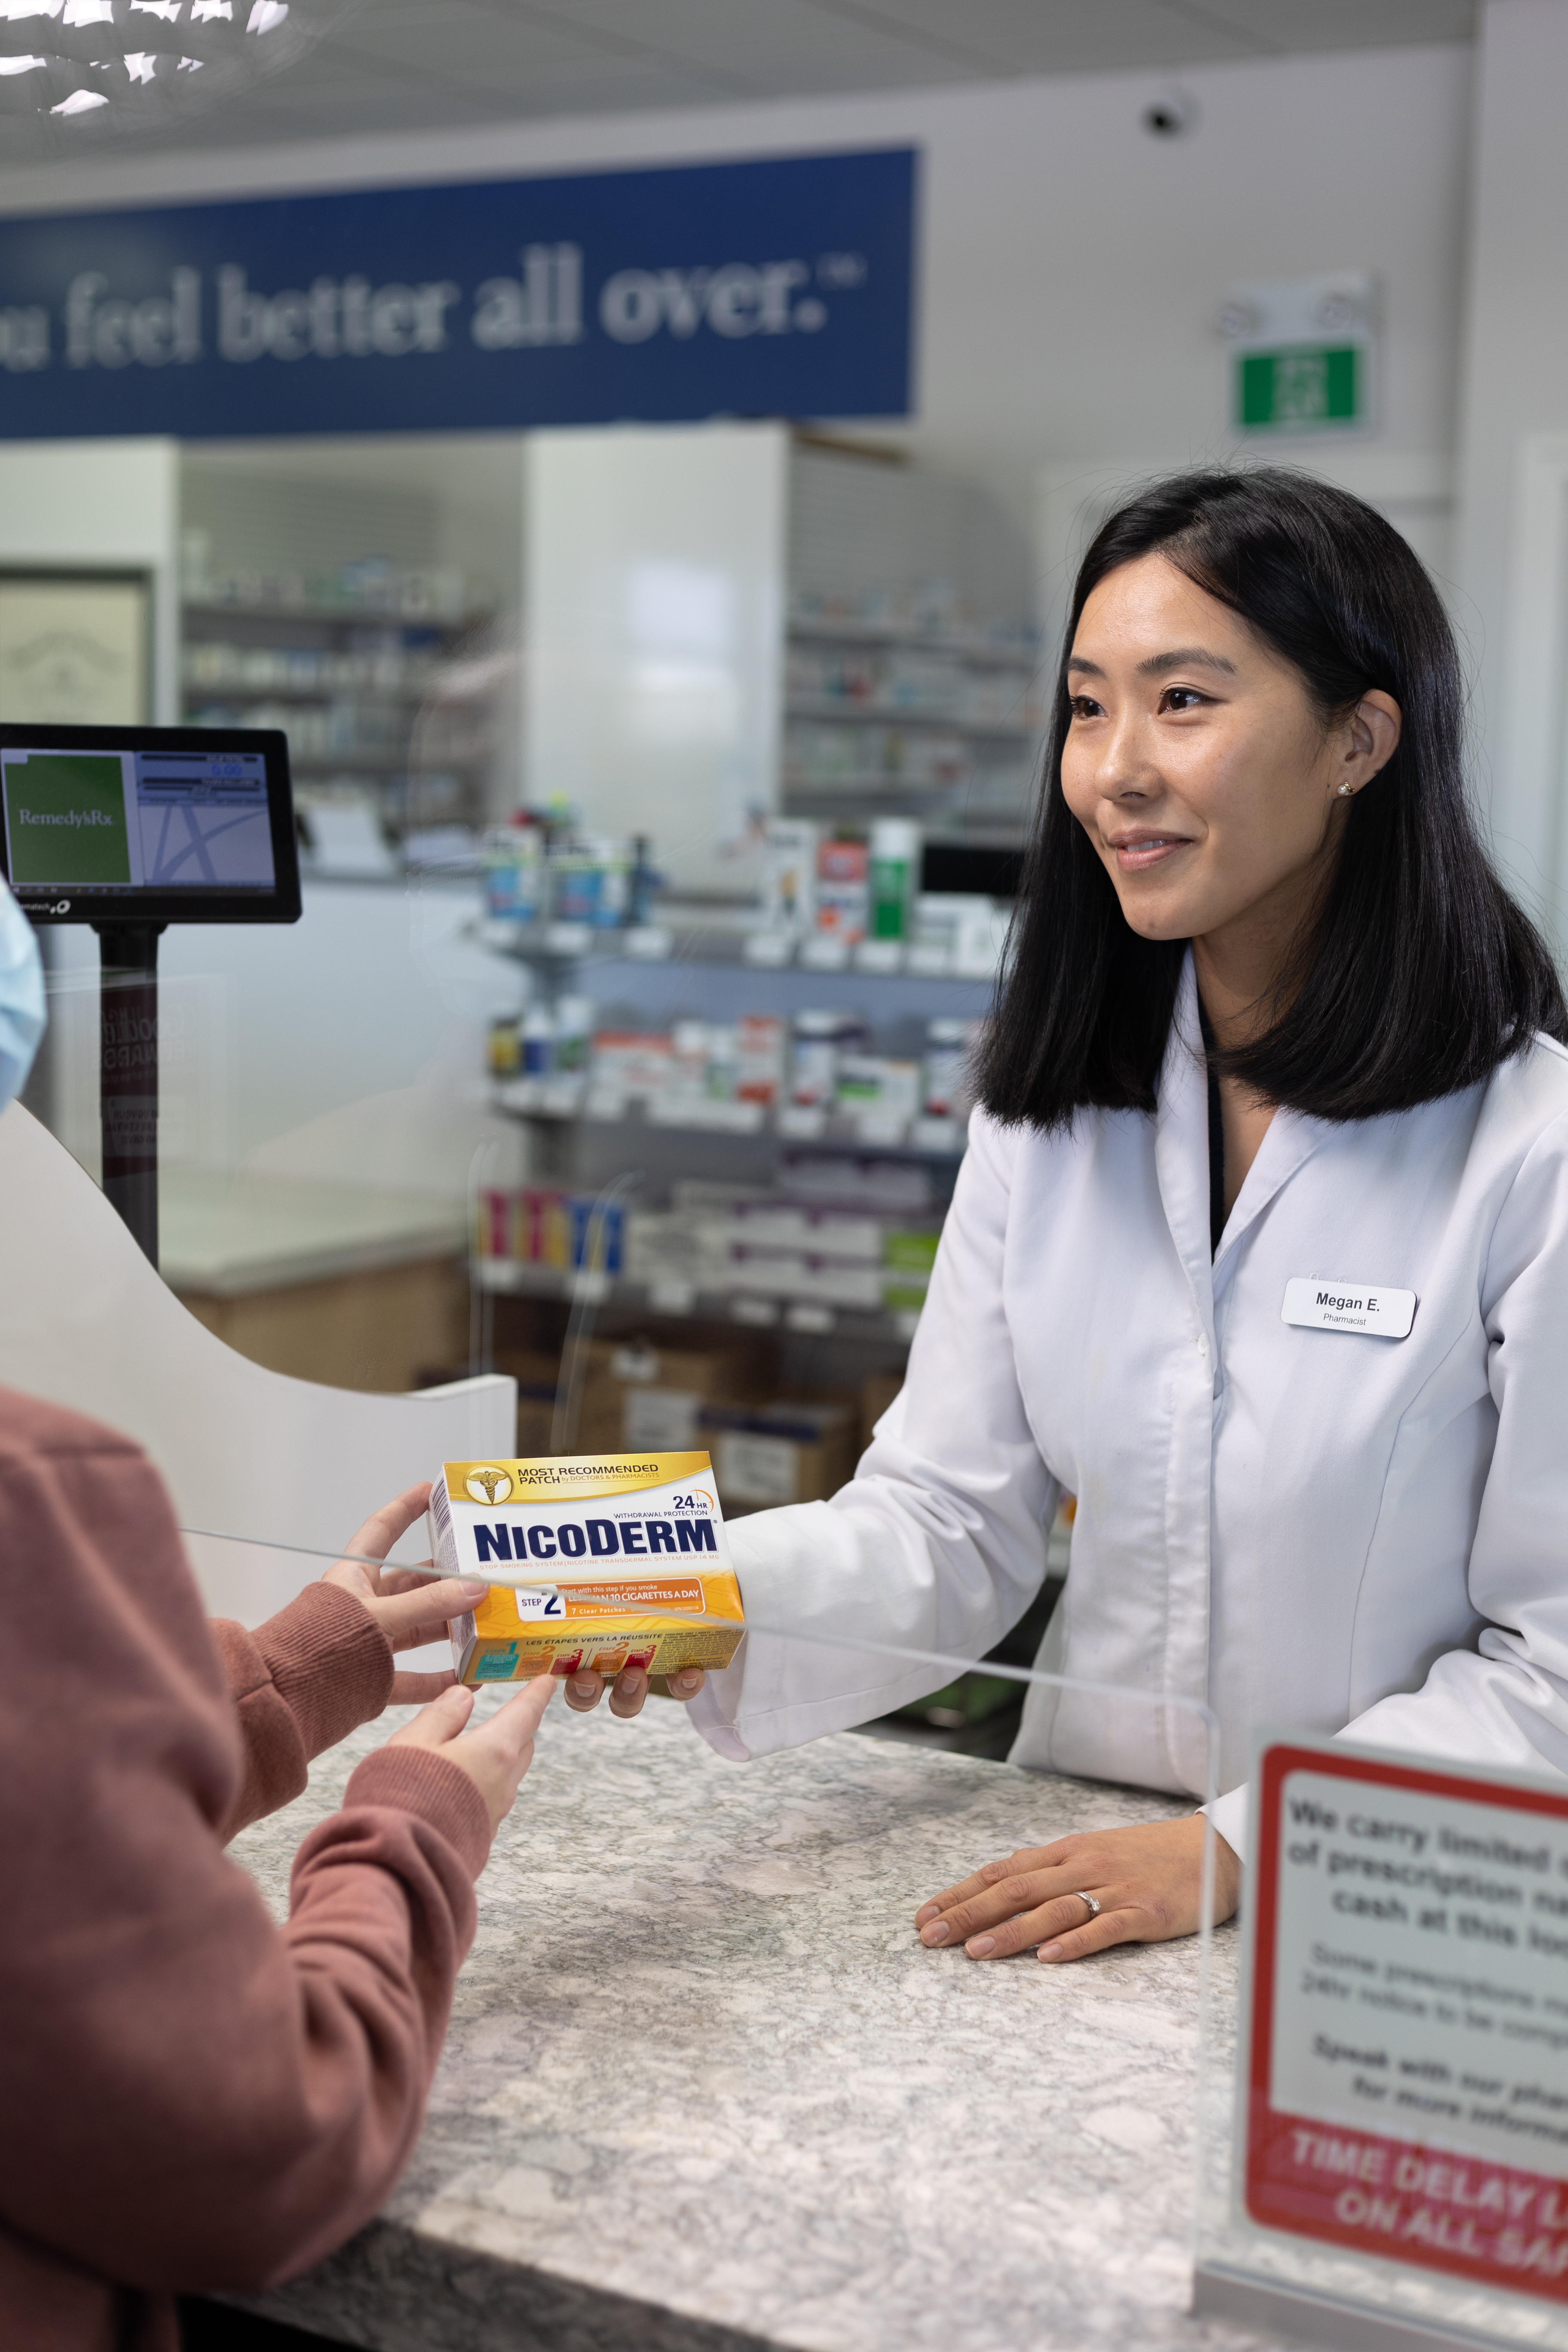 Pharmacist giving nicotine replacement therapy